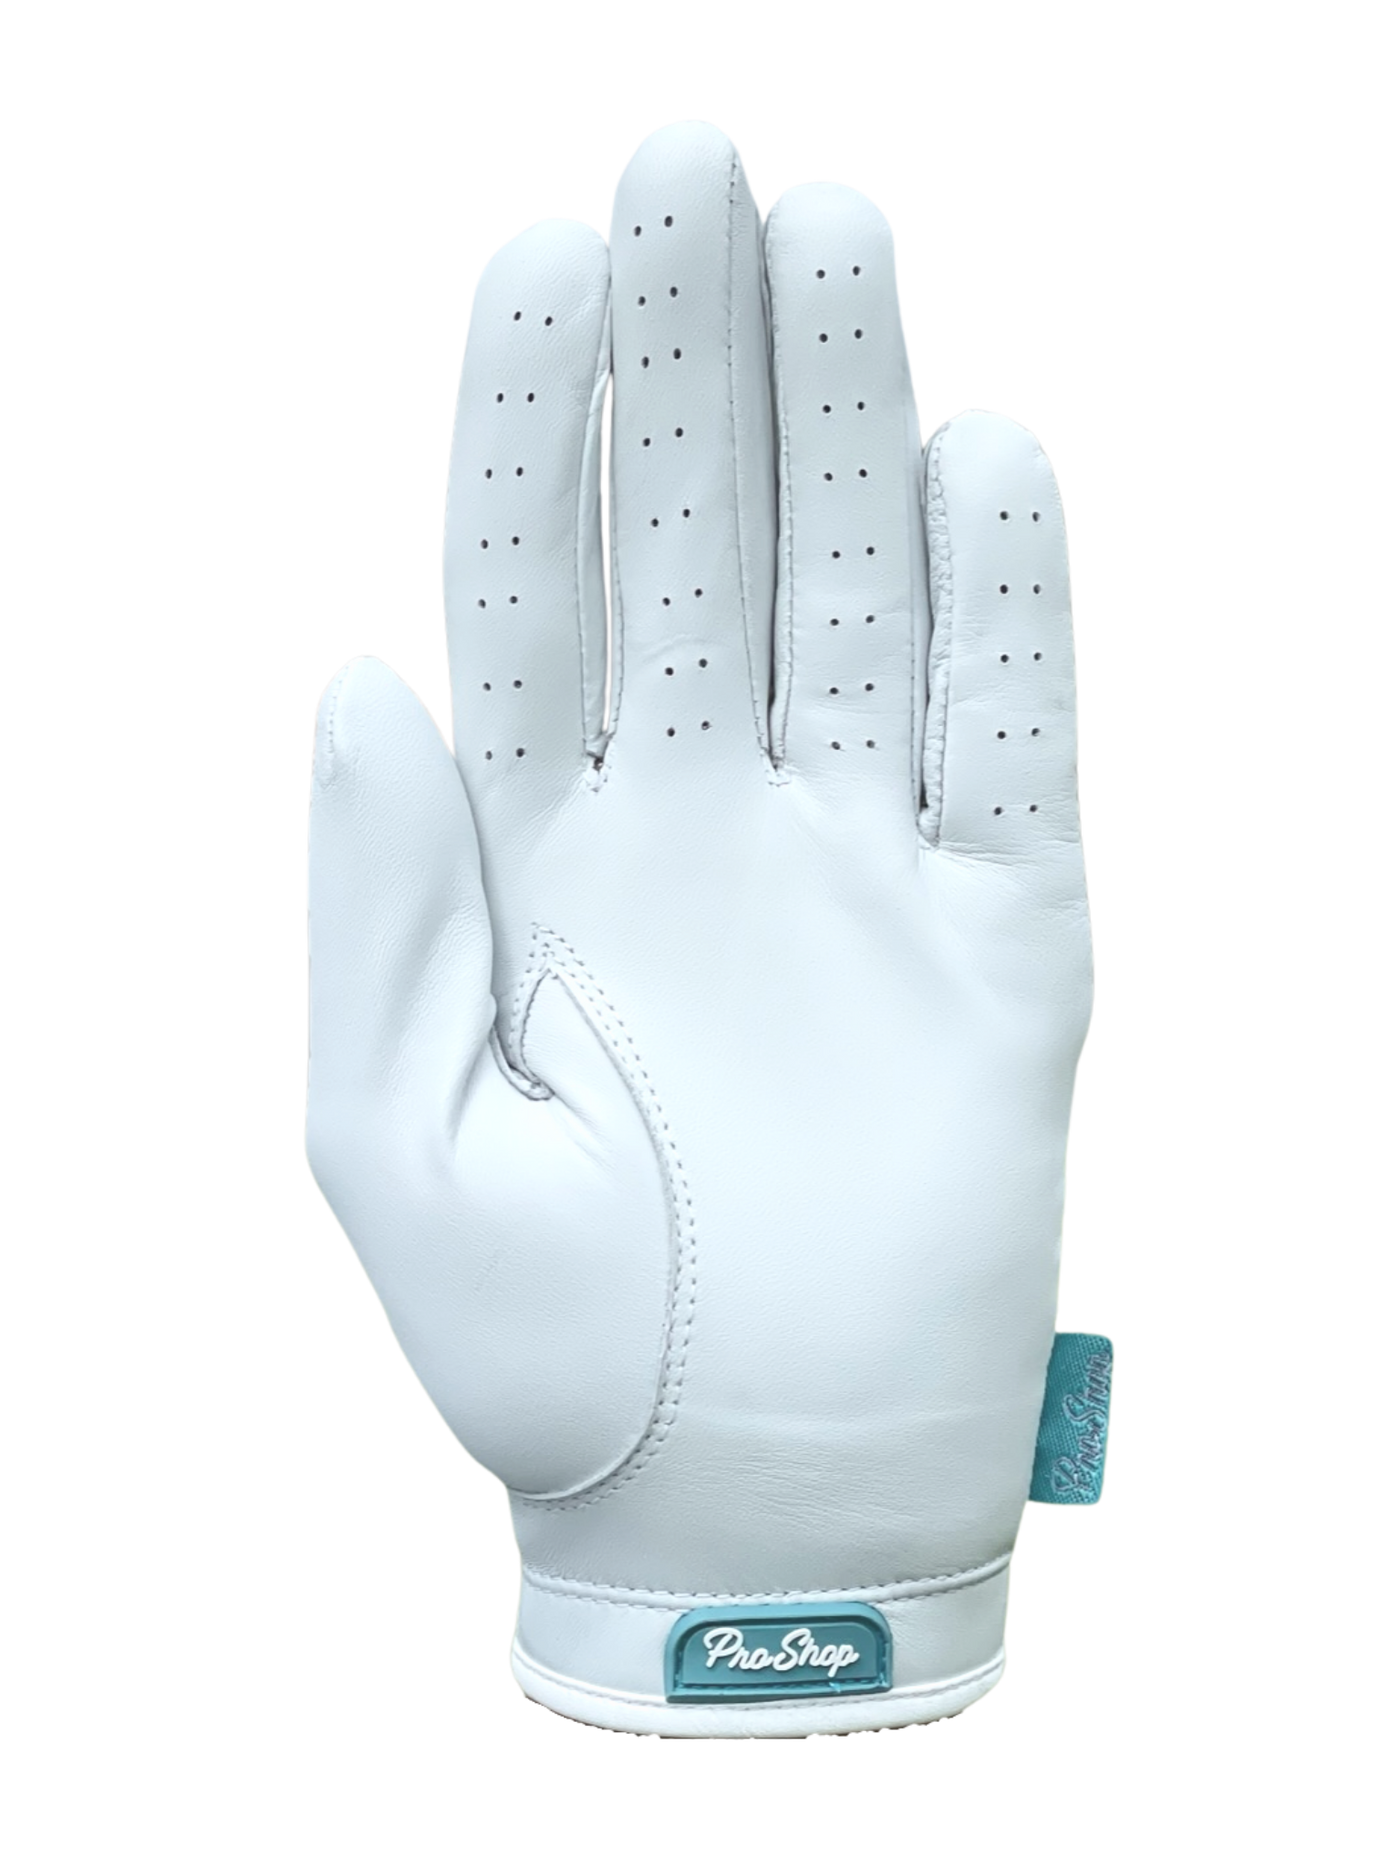 The Players Glove